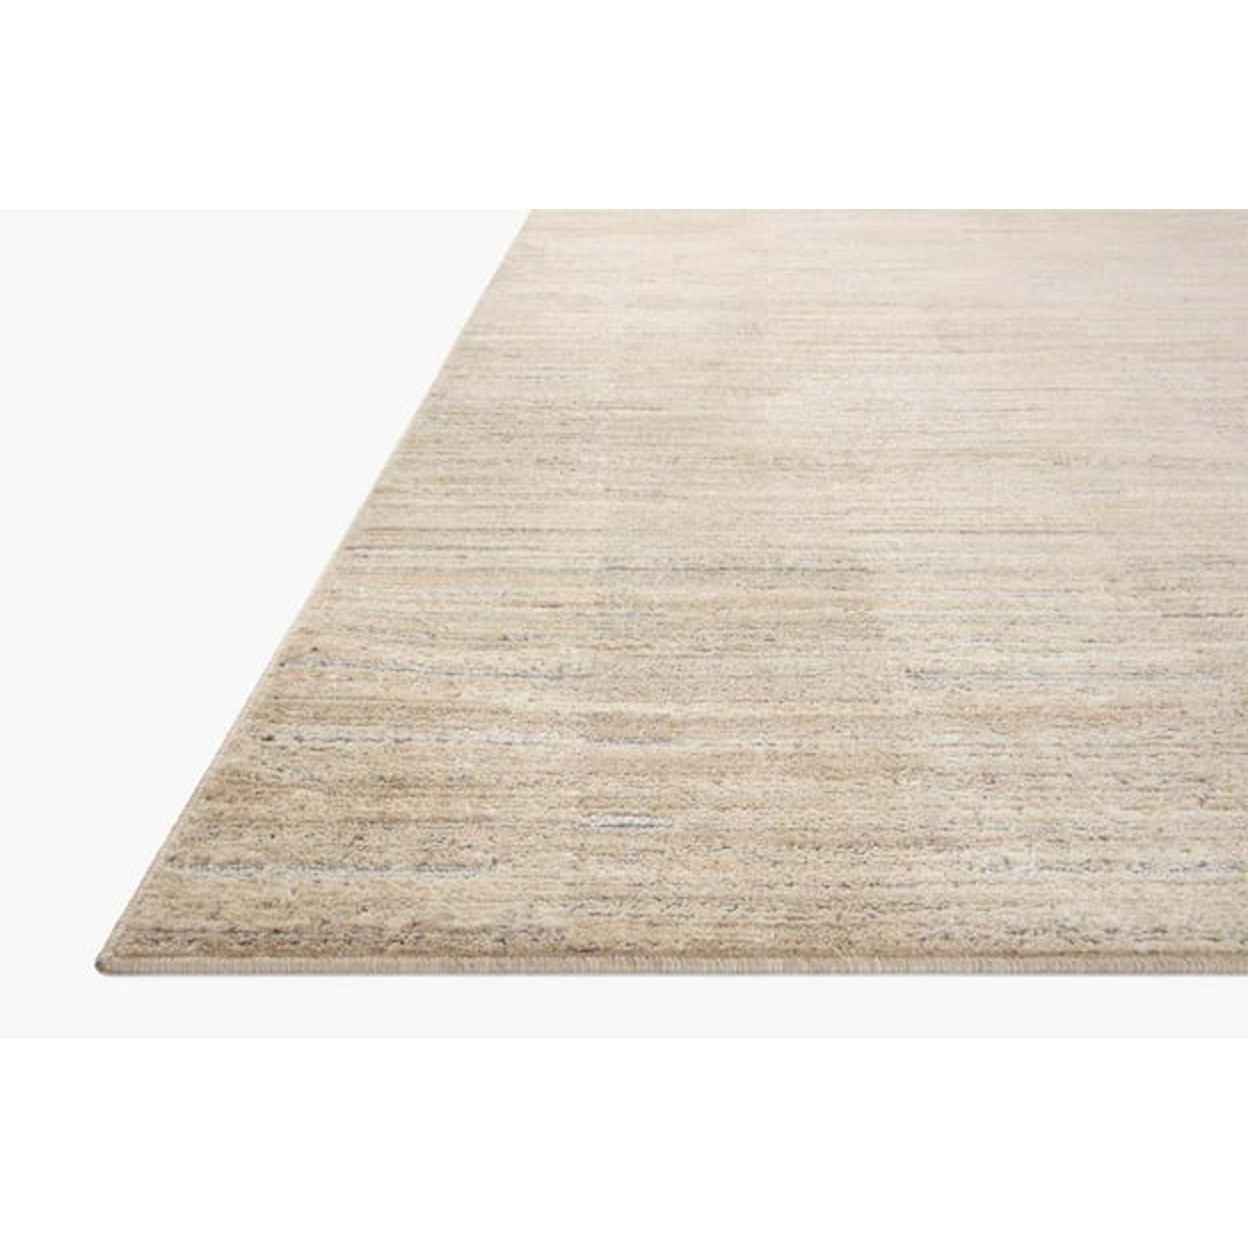 Loloi Rugs Arden 6'3'' x 9' NATURAL / PEBBLE RUG